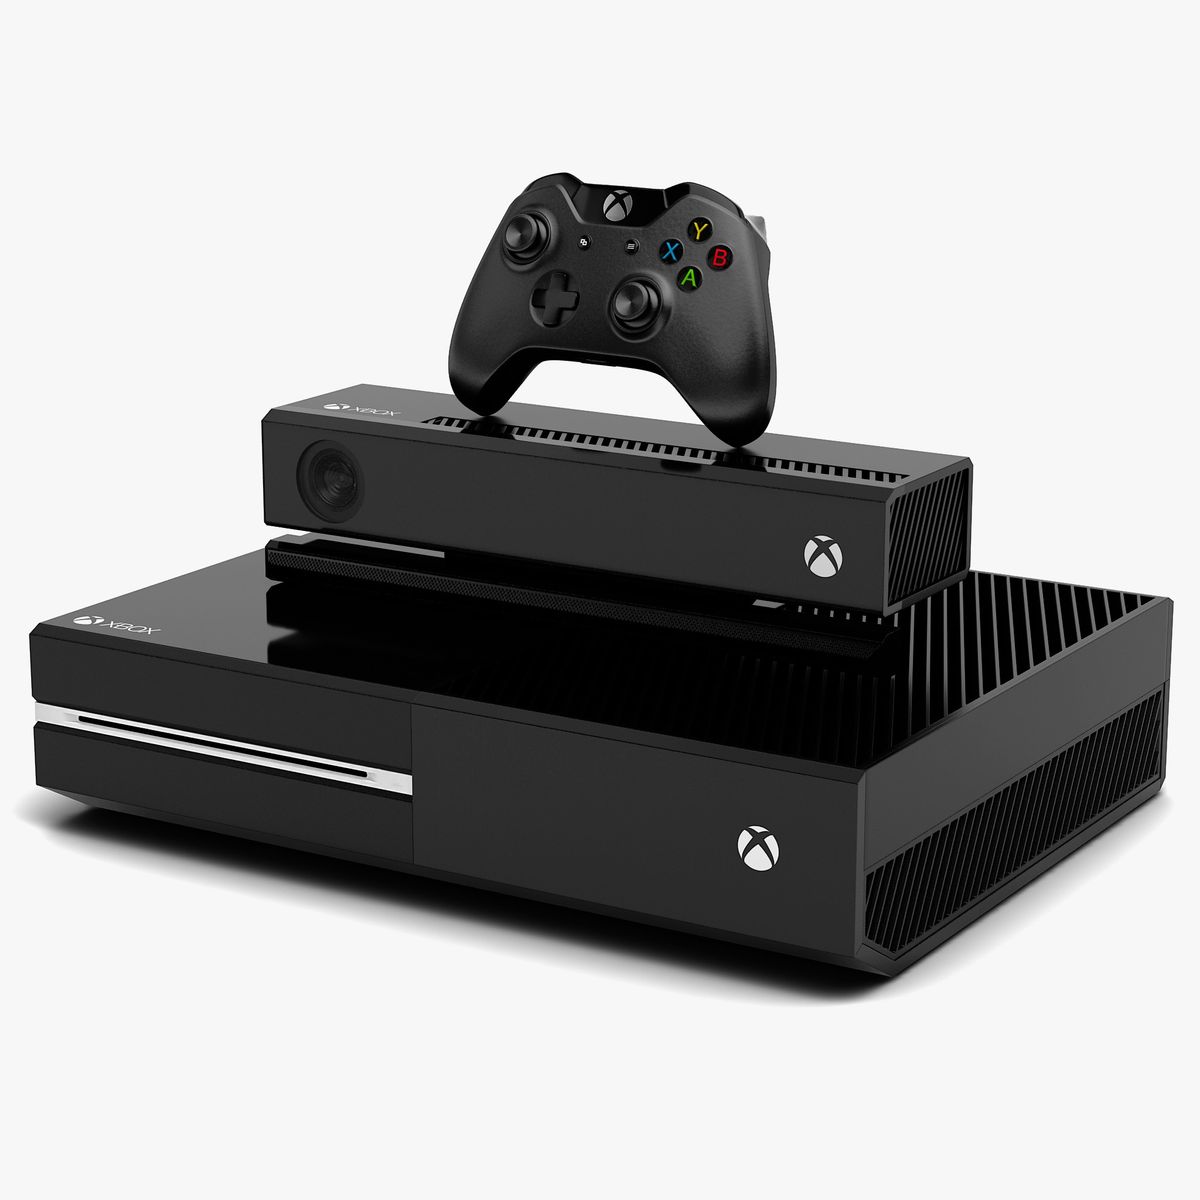 Local Multiplayer on Xbox - Xbox Features - Developer Forum